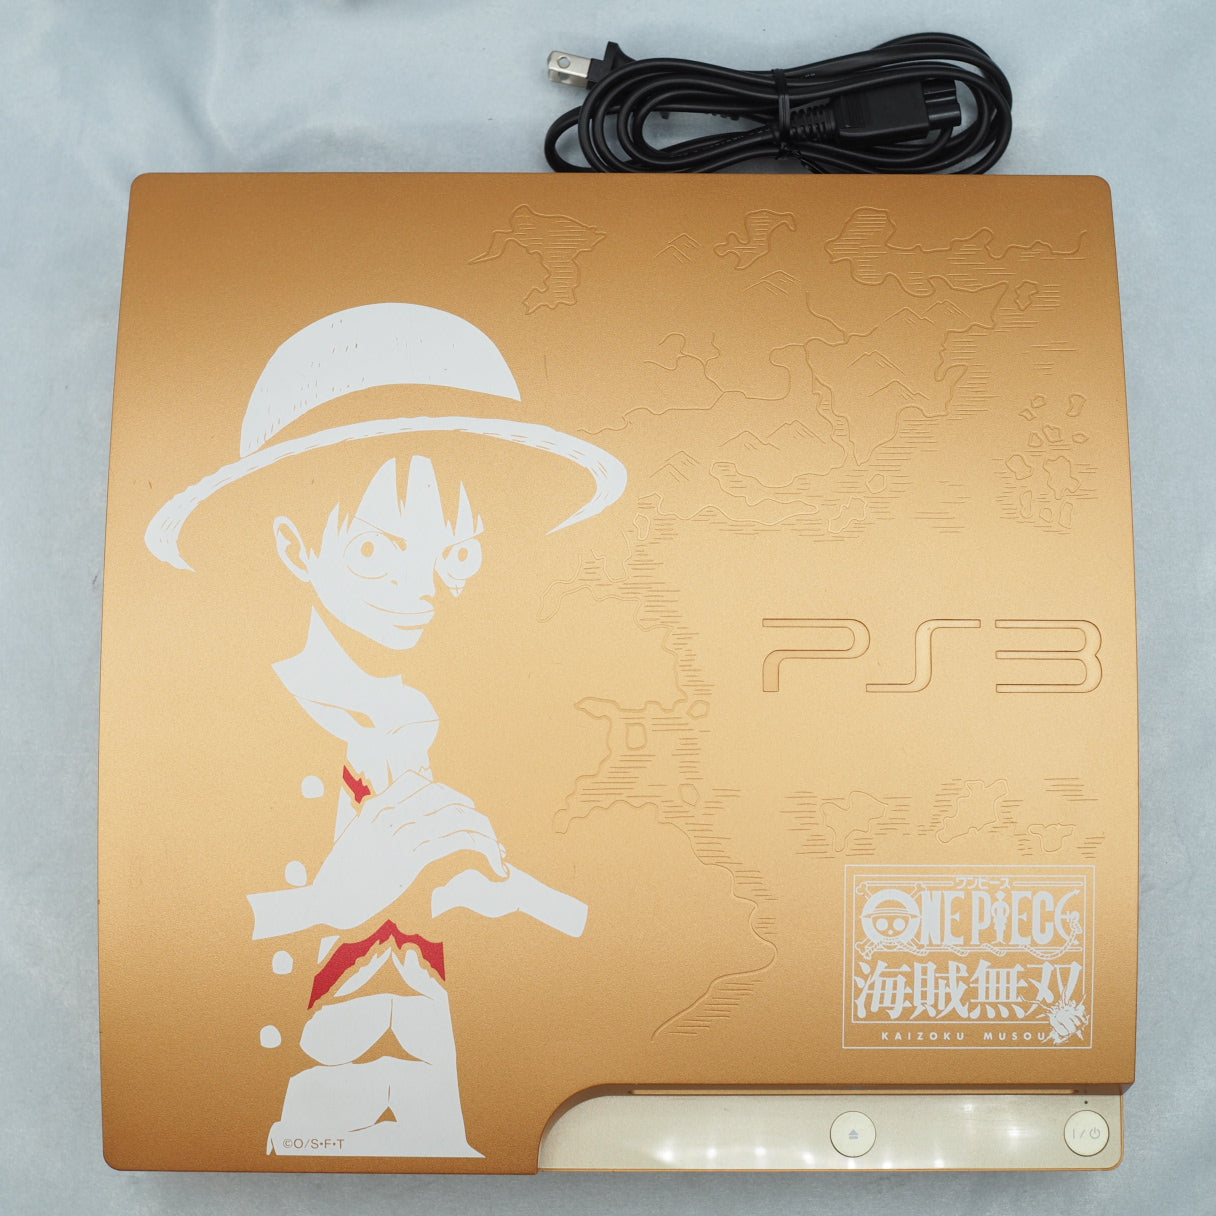 PS3 ONE PIECE Kaizoku Musou GOLD EDITION Console System Only